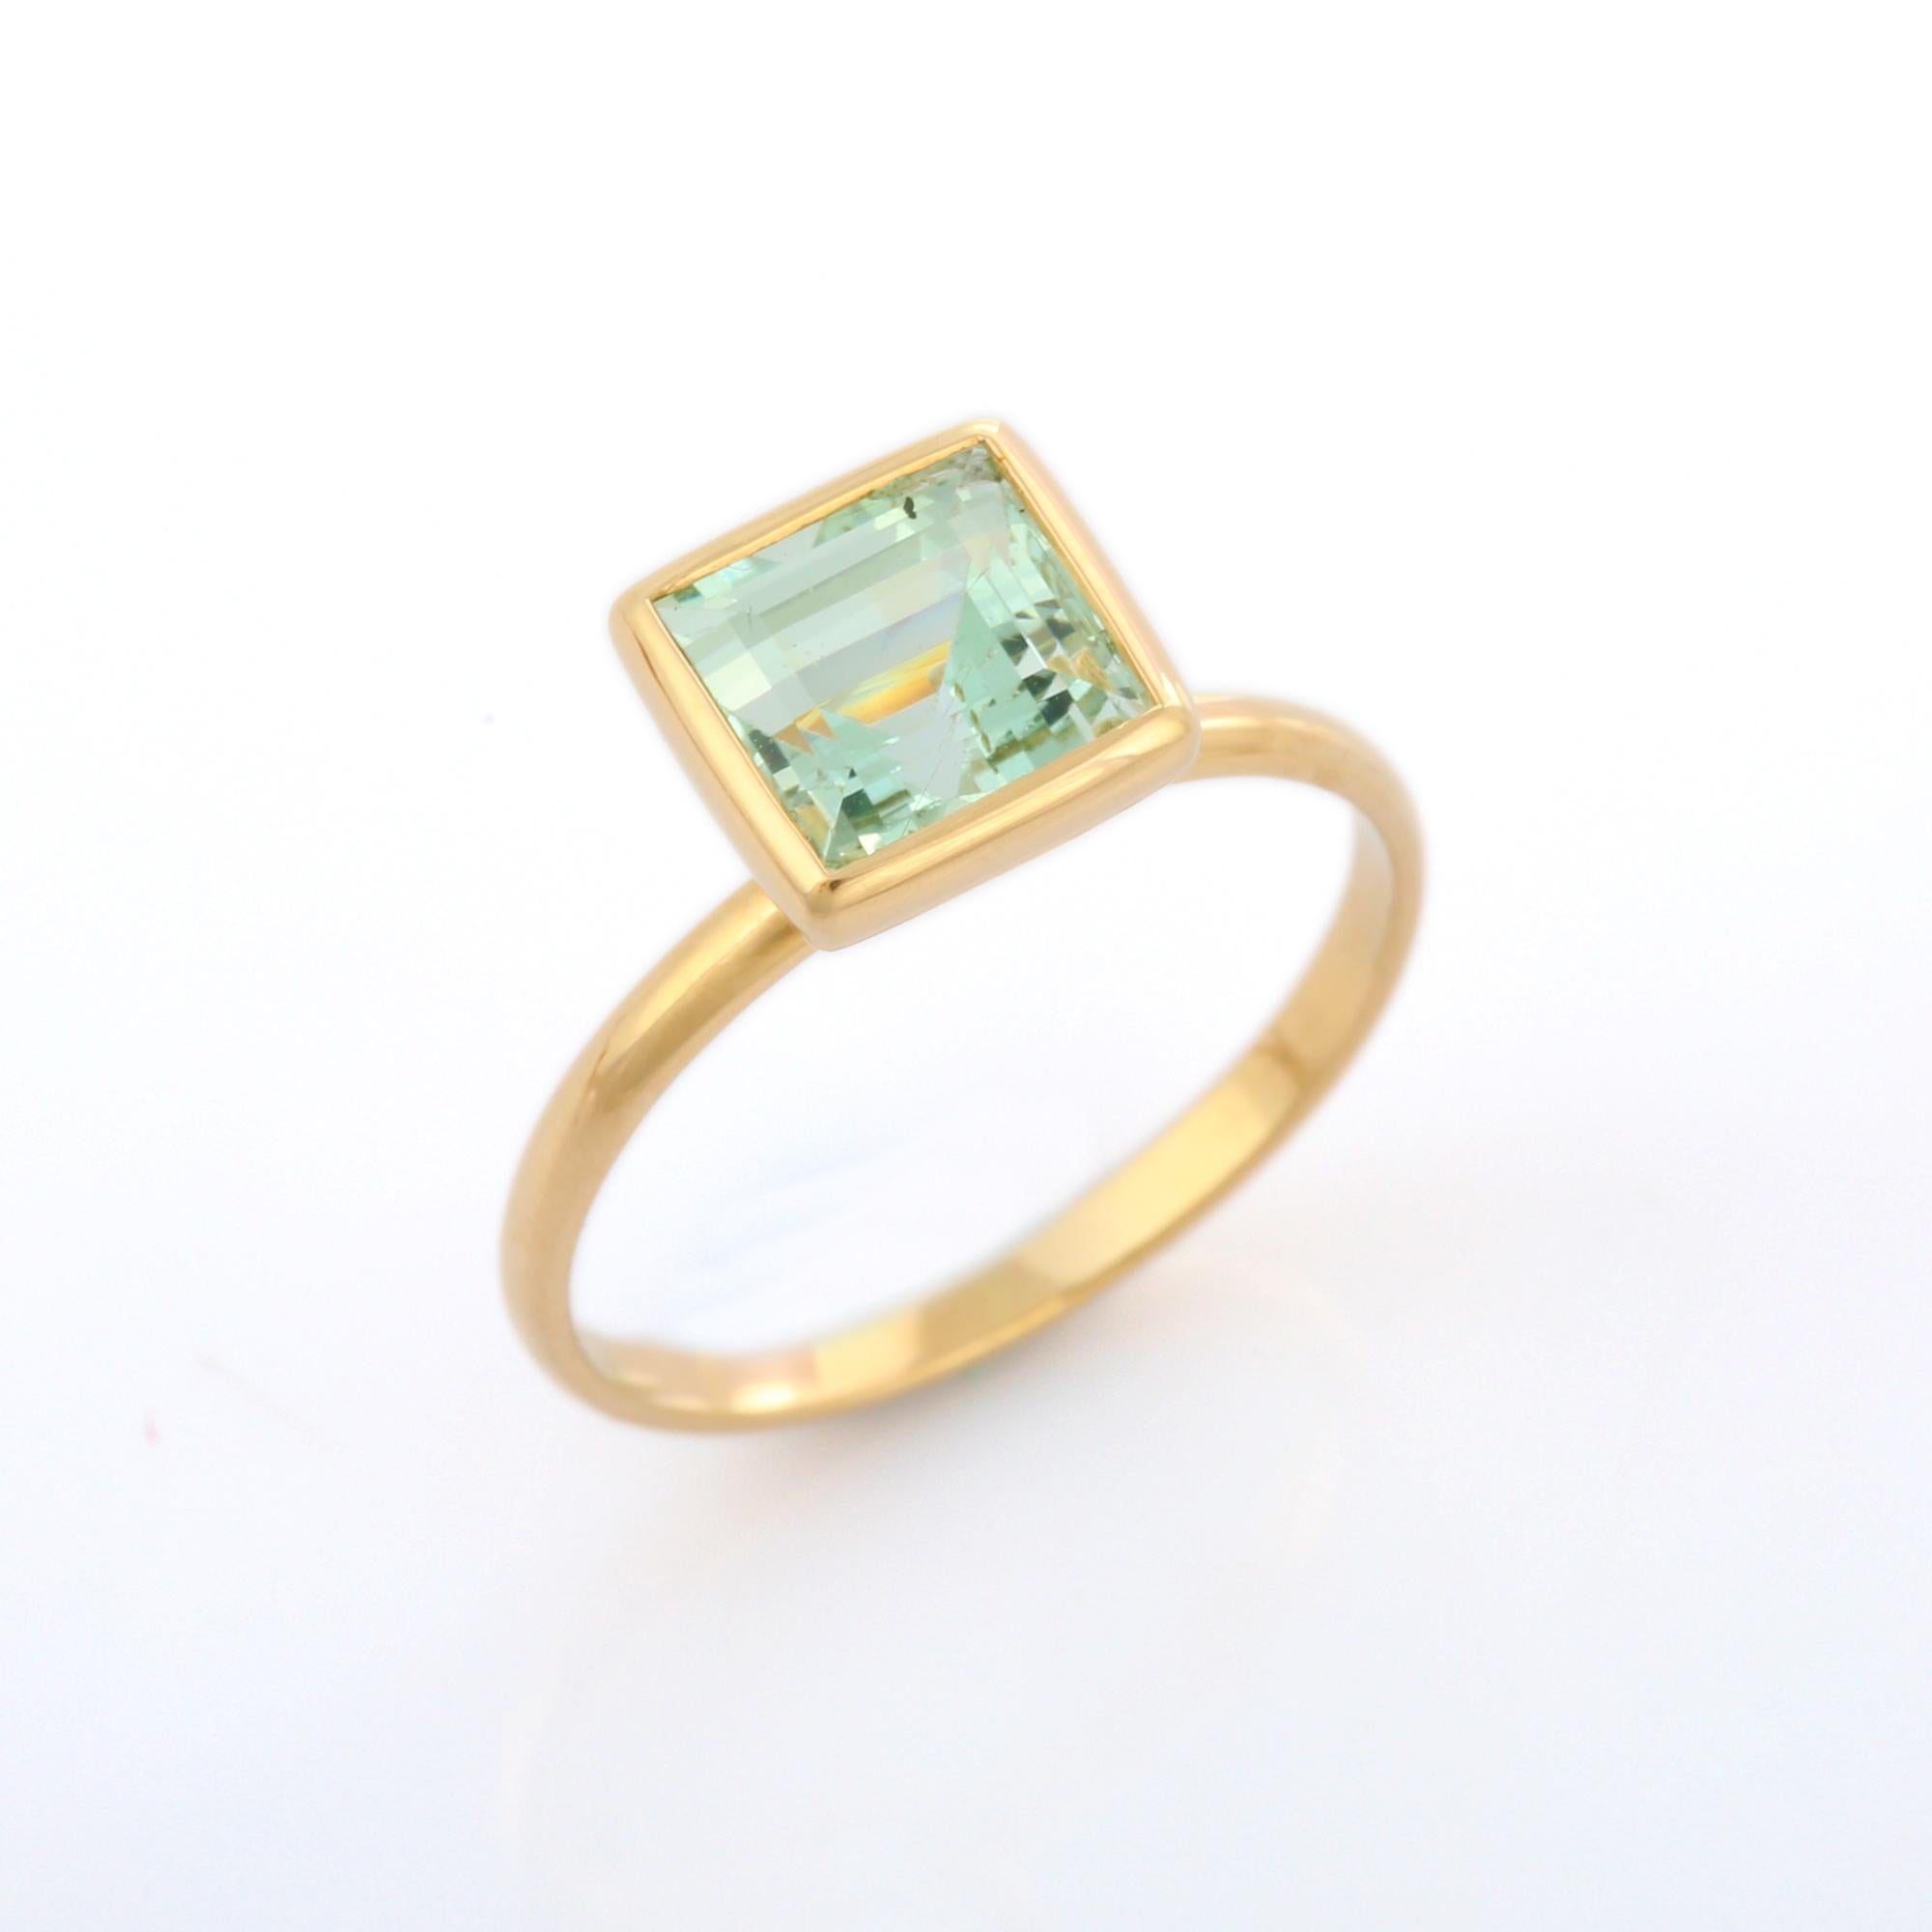 For Sale:  Natural Aquamarine Square Cut Gemstone Ring in 18K Yellow Gold 3